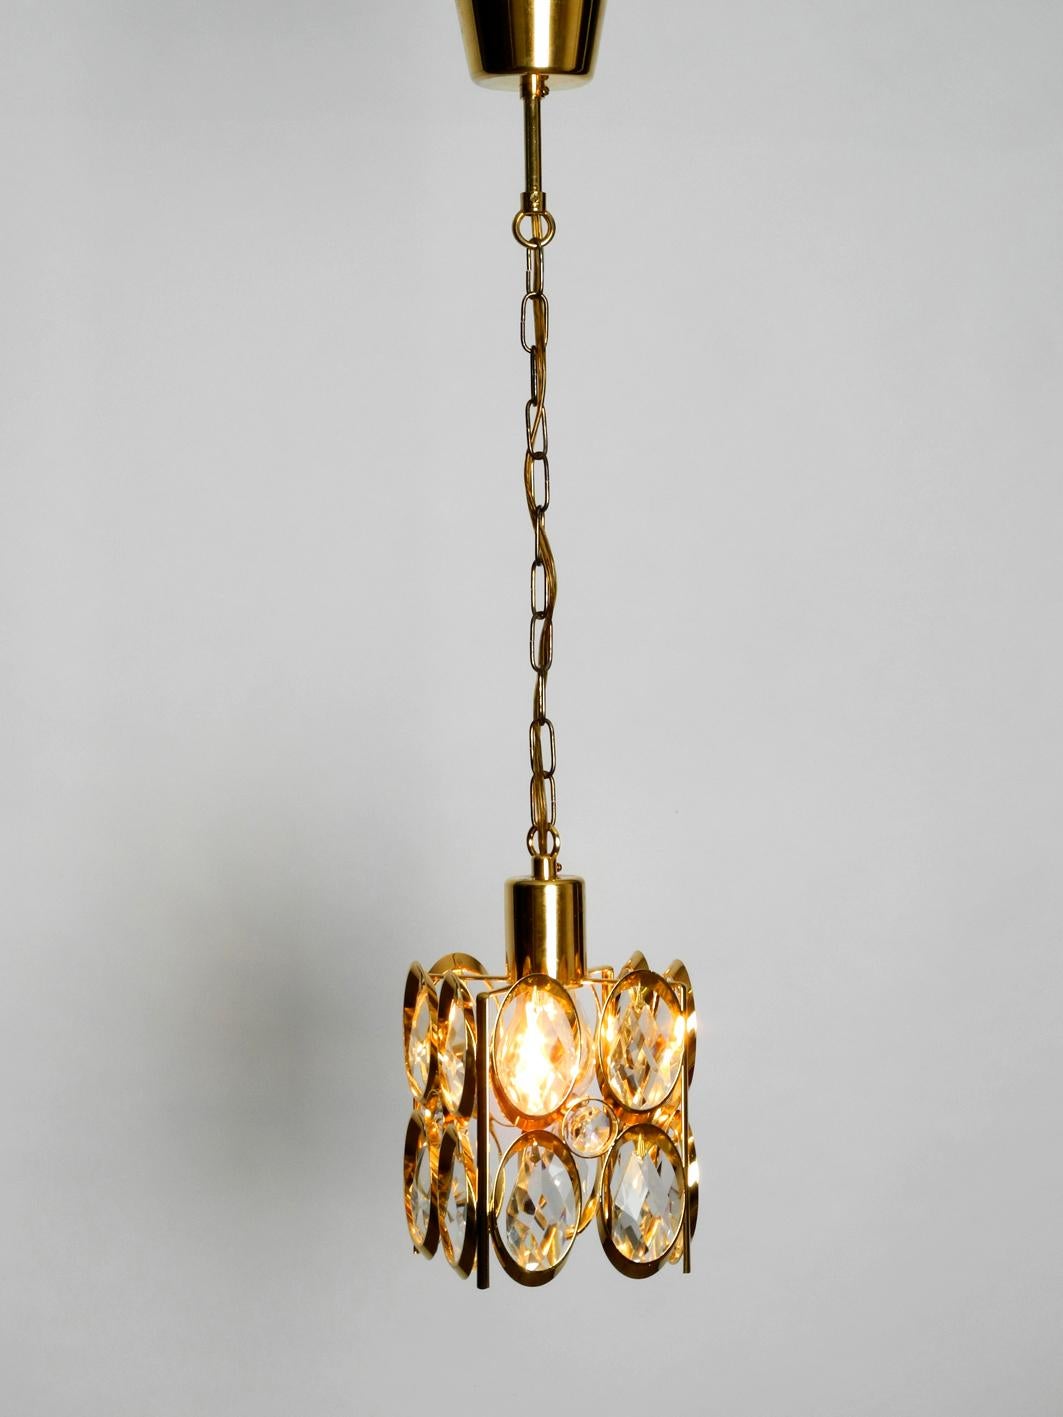 Rare beautiful 1970s Palwa brass pendant lamp with faceted crystal stones.
High-quality work, frame and sockets made of brass. Produced by Pawla in the 1970s. Made in Germany. Great rare design for very pleasant illumination with one E27